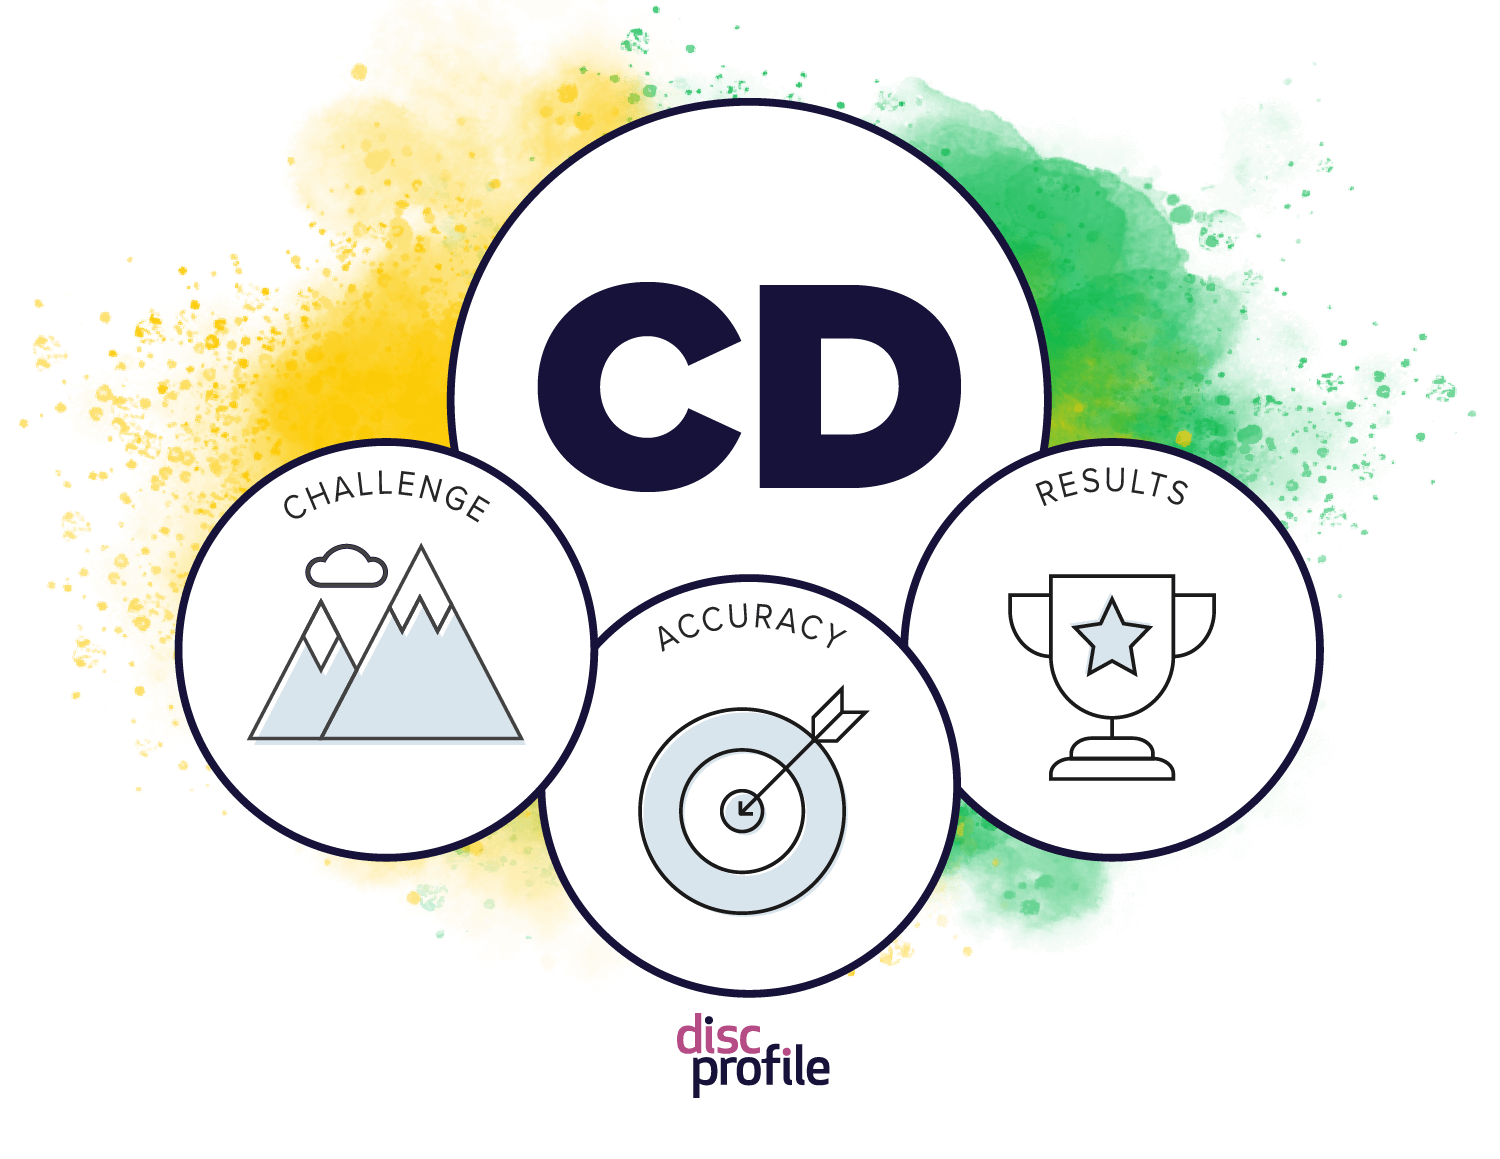 CD style graphic with priorities: challenge, accuracy, results